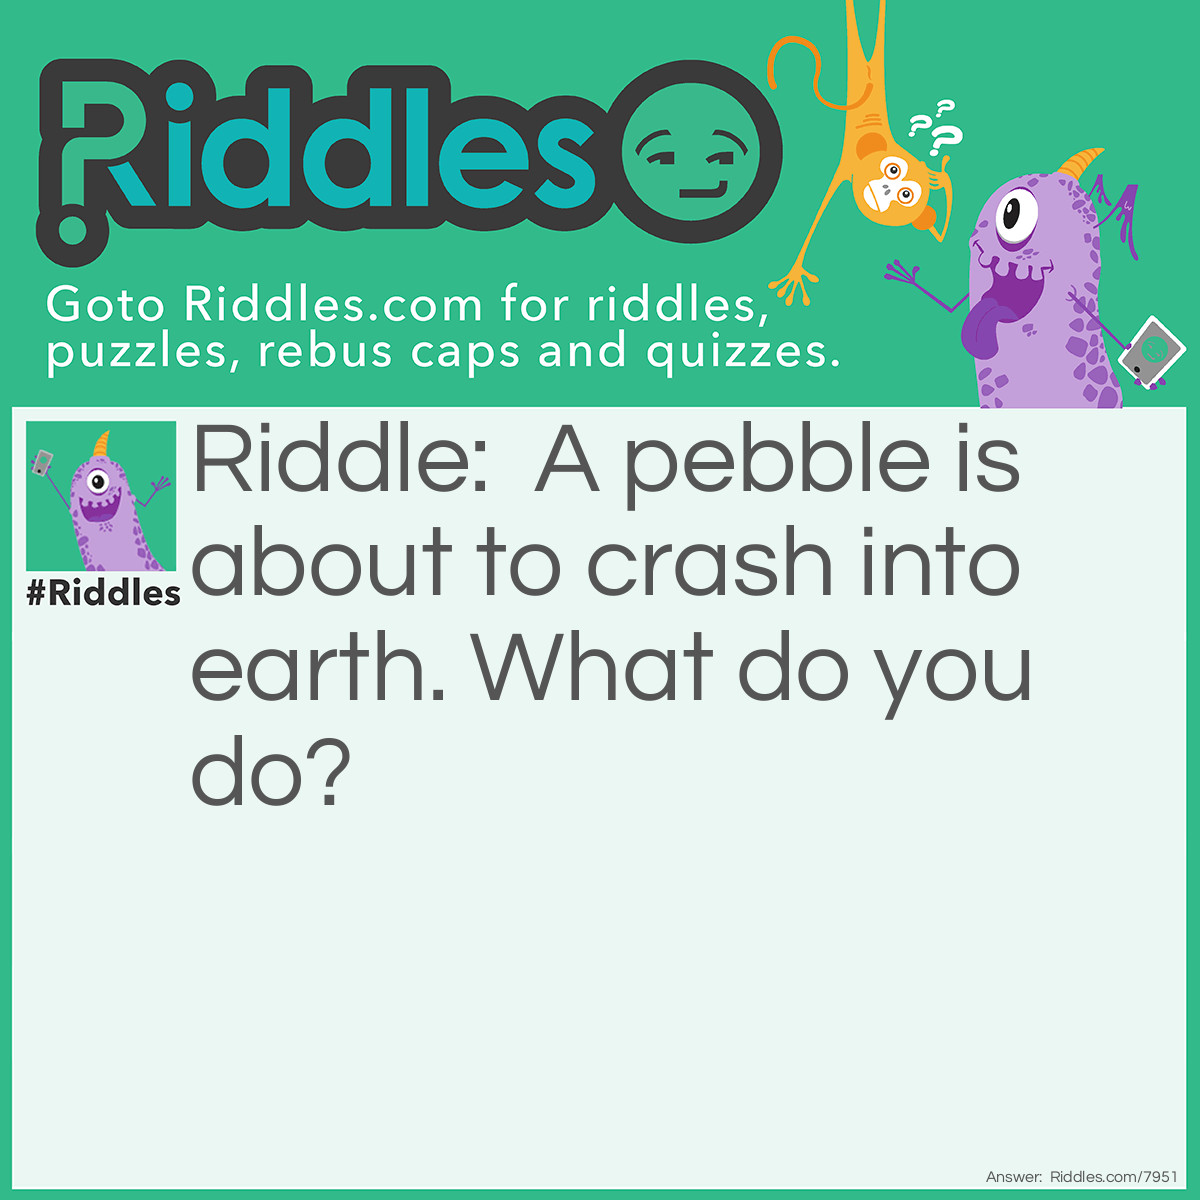 Riddle: A pebble is about to crash into earth. What do you do? Answer: It’s a PEBBLE. Do you expect a pebble do destroy earth?